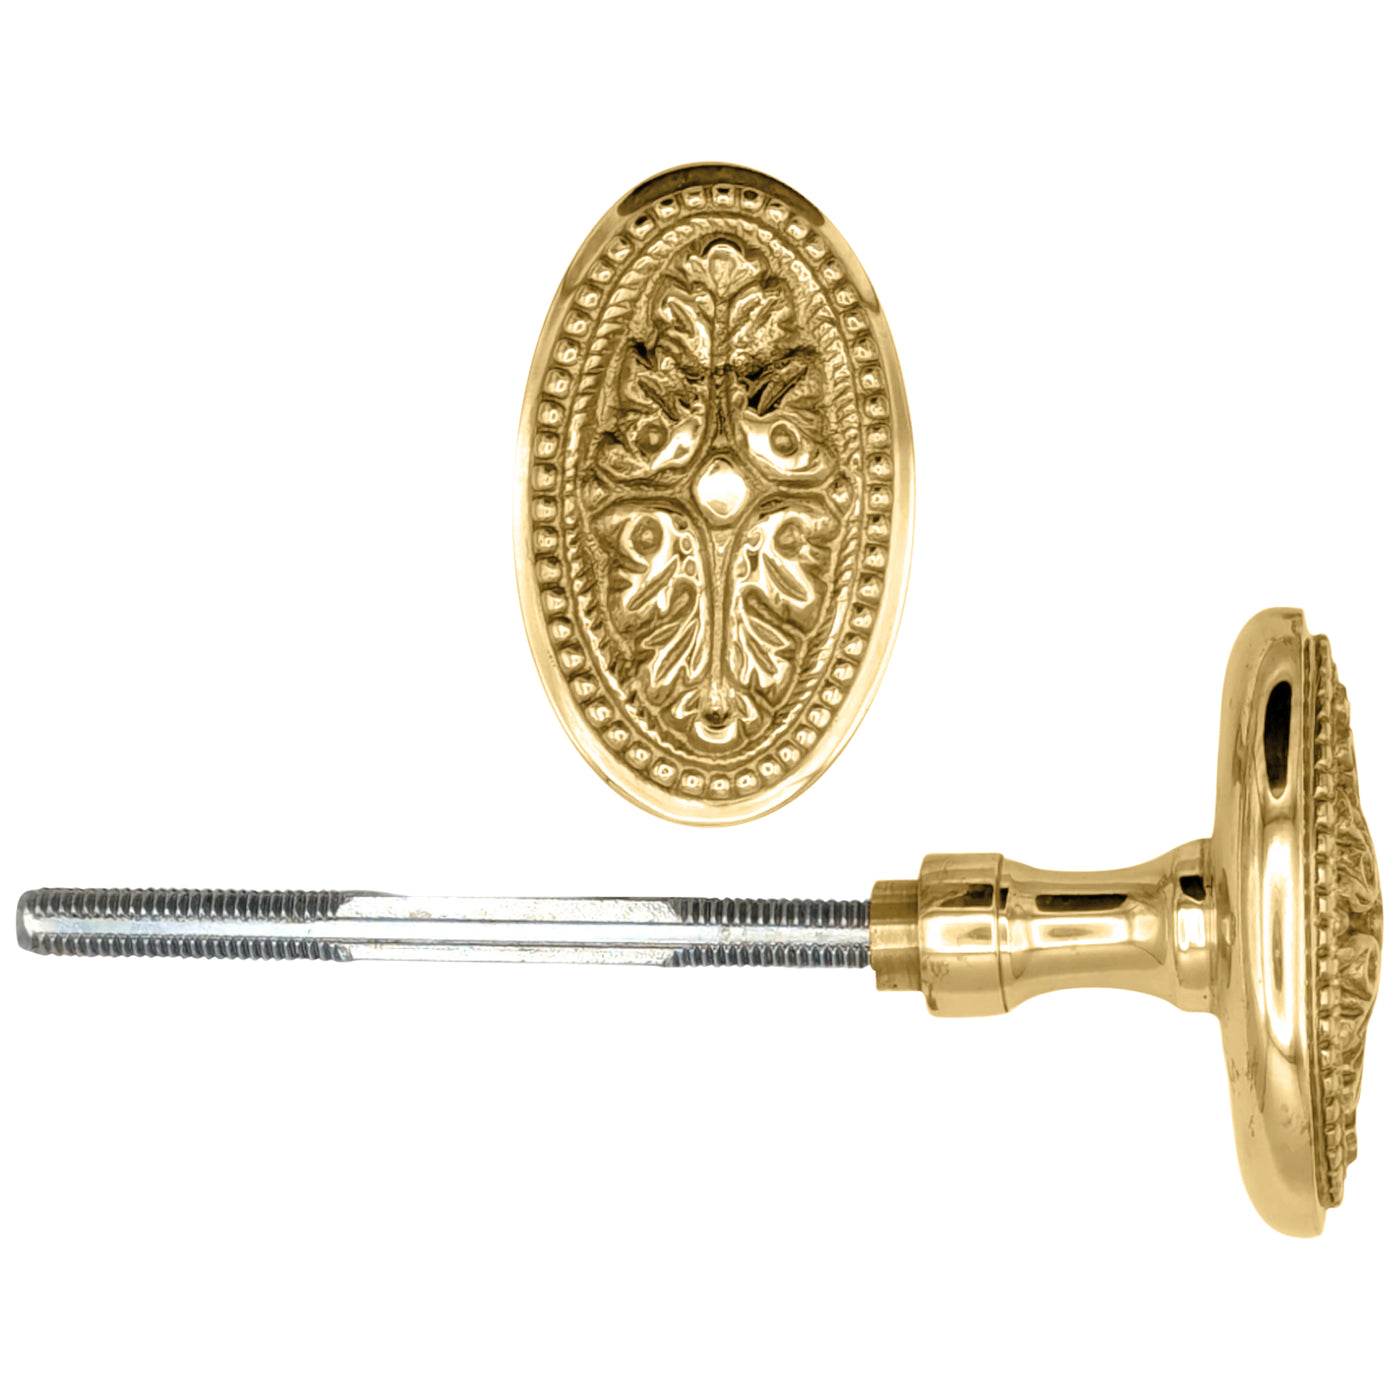 Avalon Oval Solid Brass Spare Door Knob Set (Several Finishes Available)